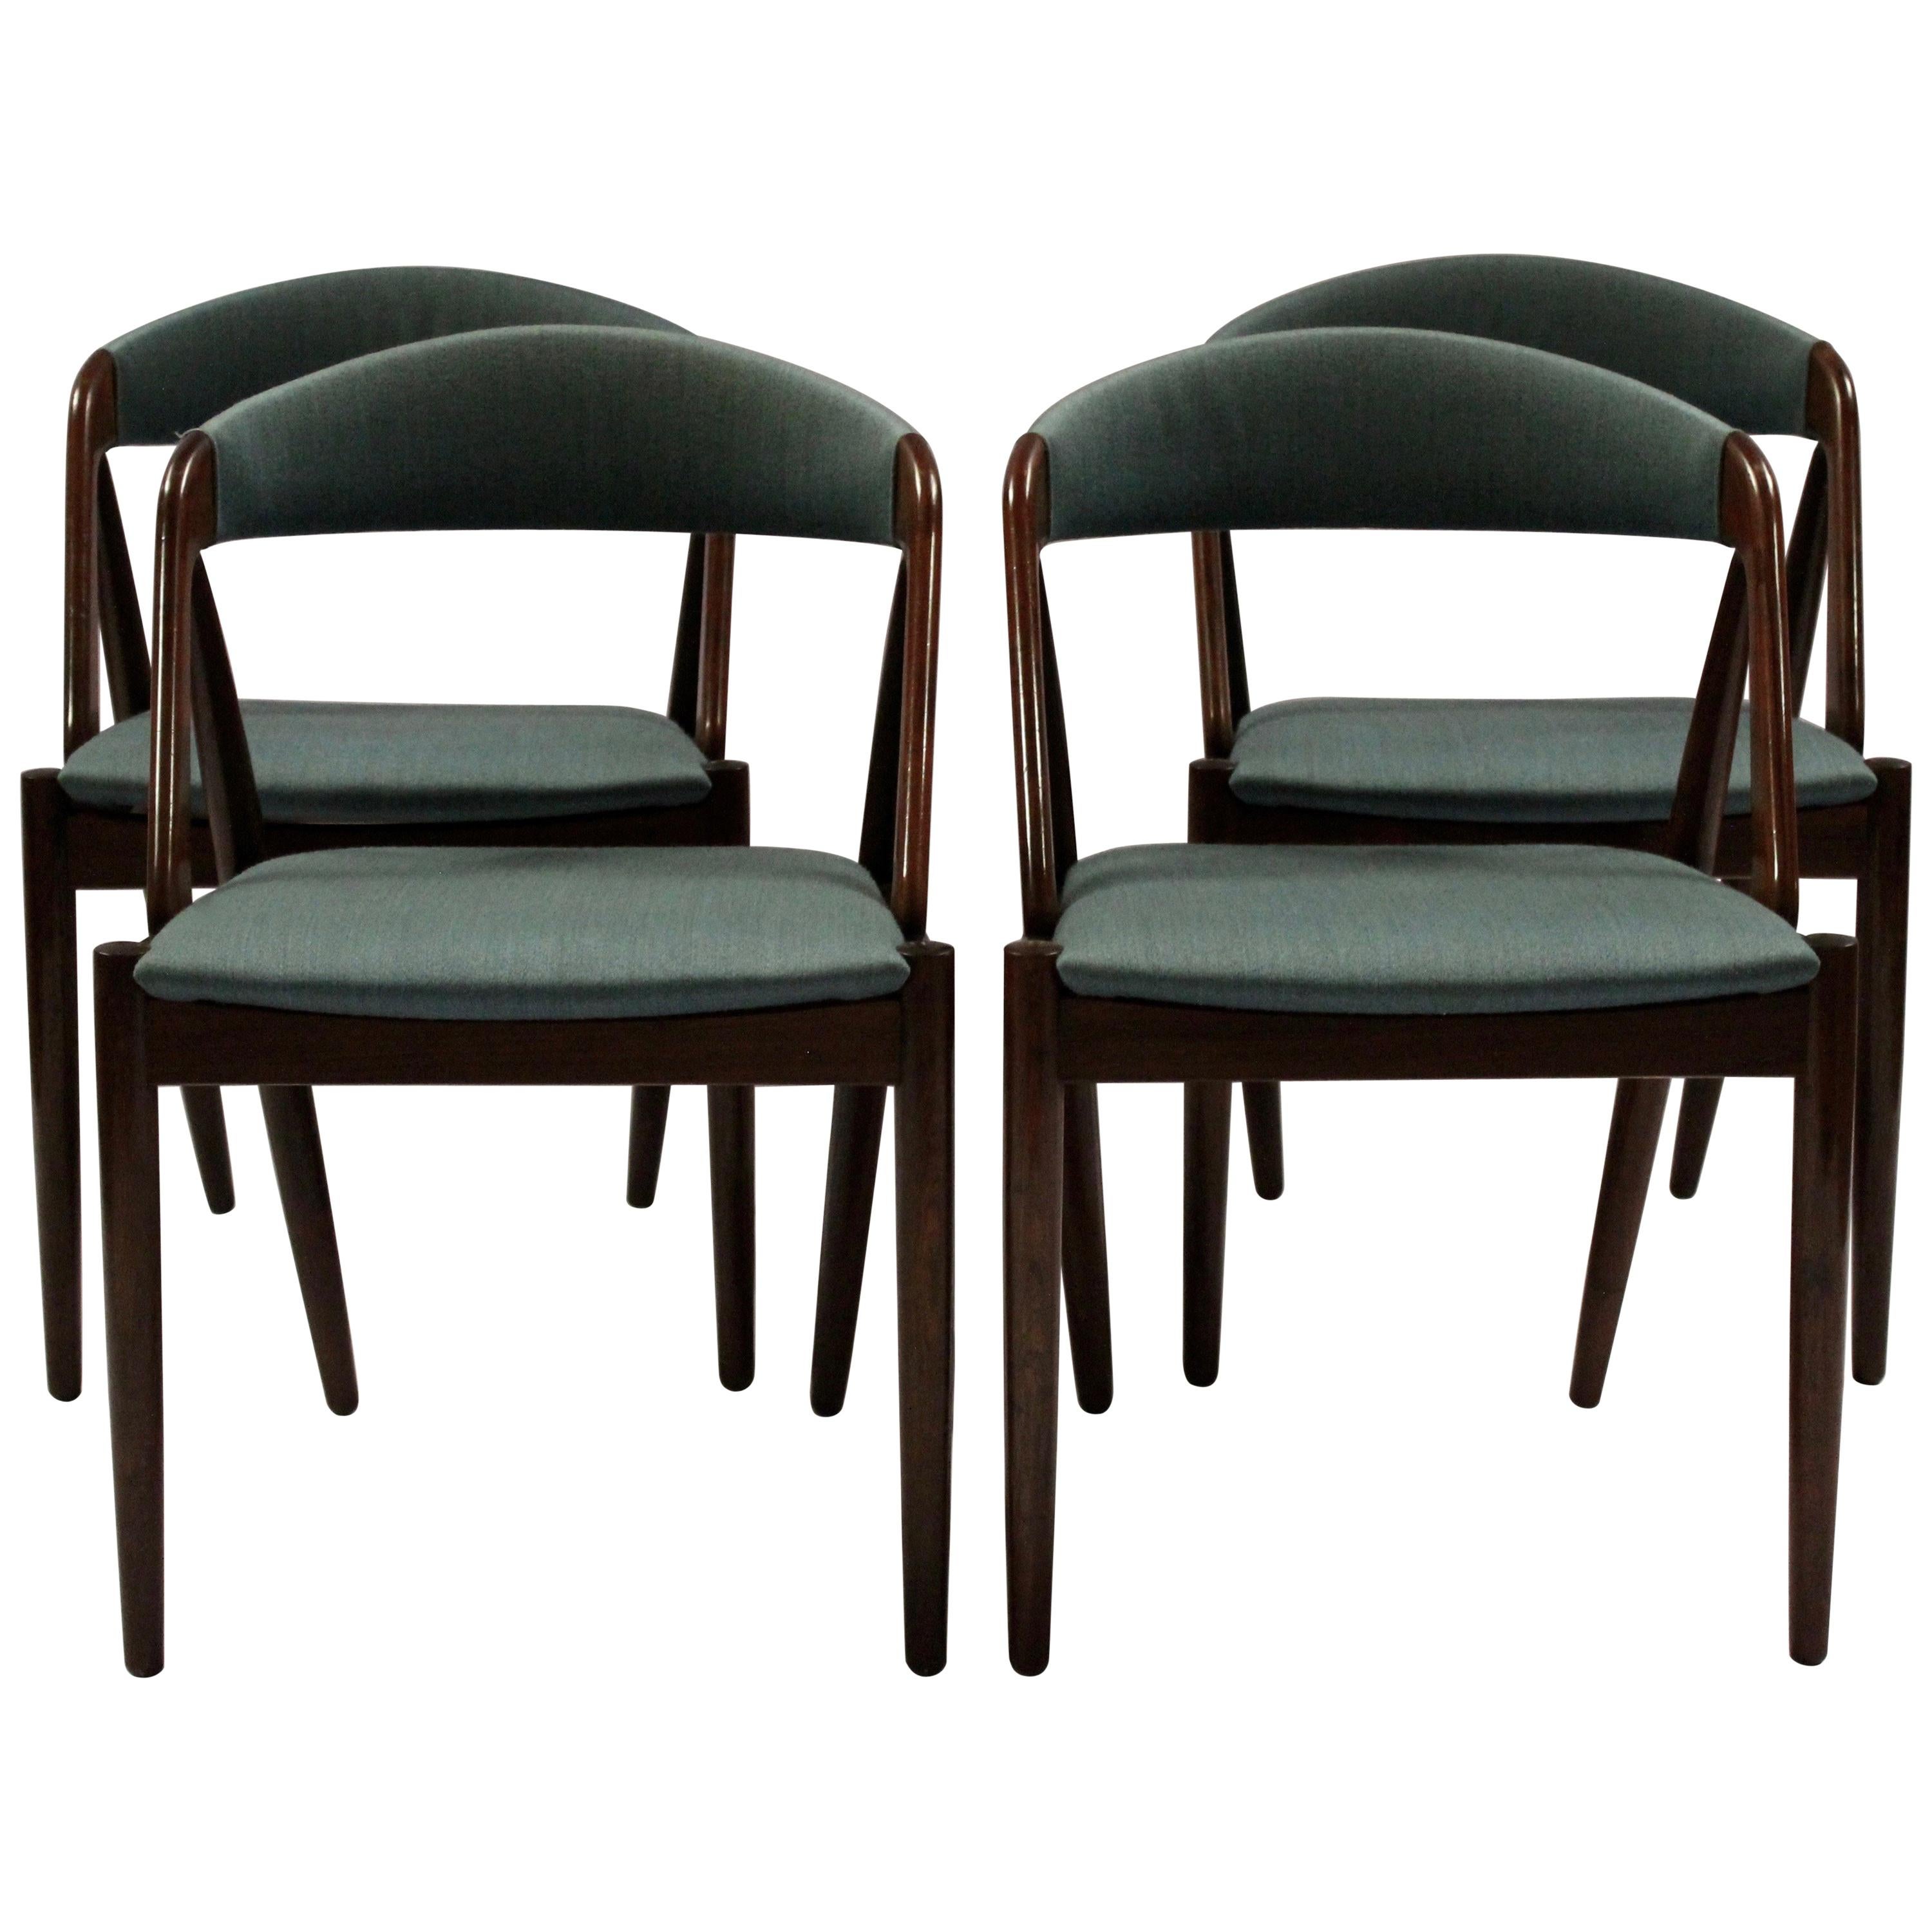 Set of Four Chairs, Model 31, by Kai Kristiansen and Schou Andersen, 1960s